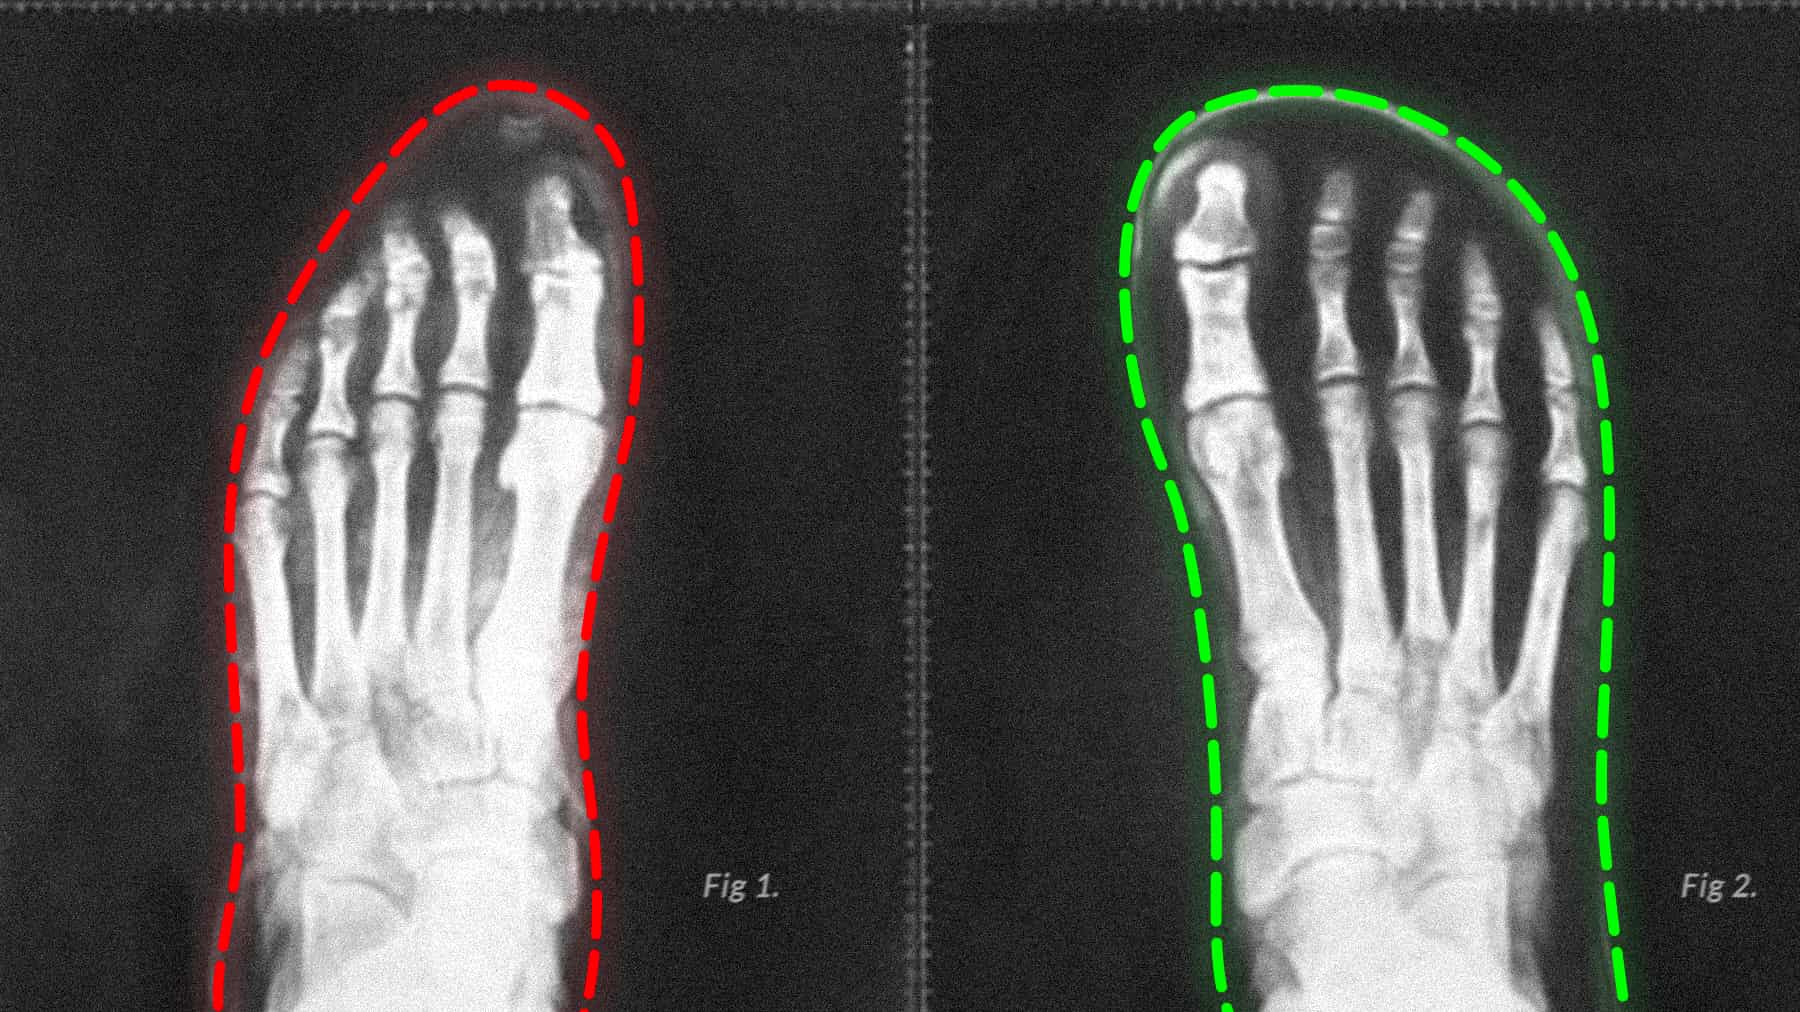 Image illustrating the difference is foot shape with modern footwear on the left versus barefoot style footwear on the right